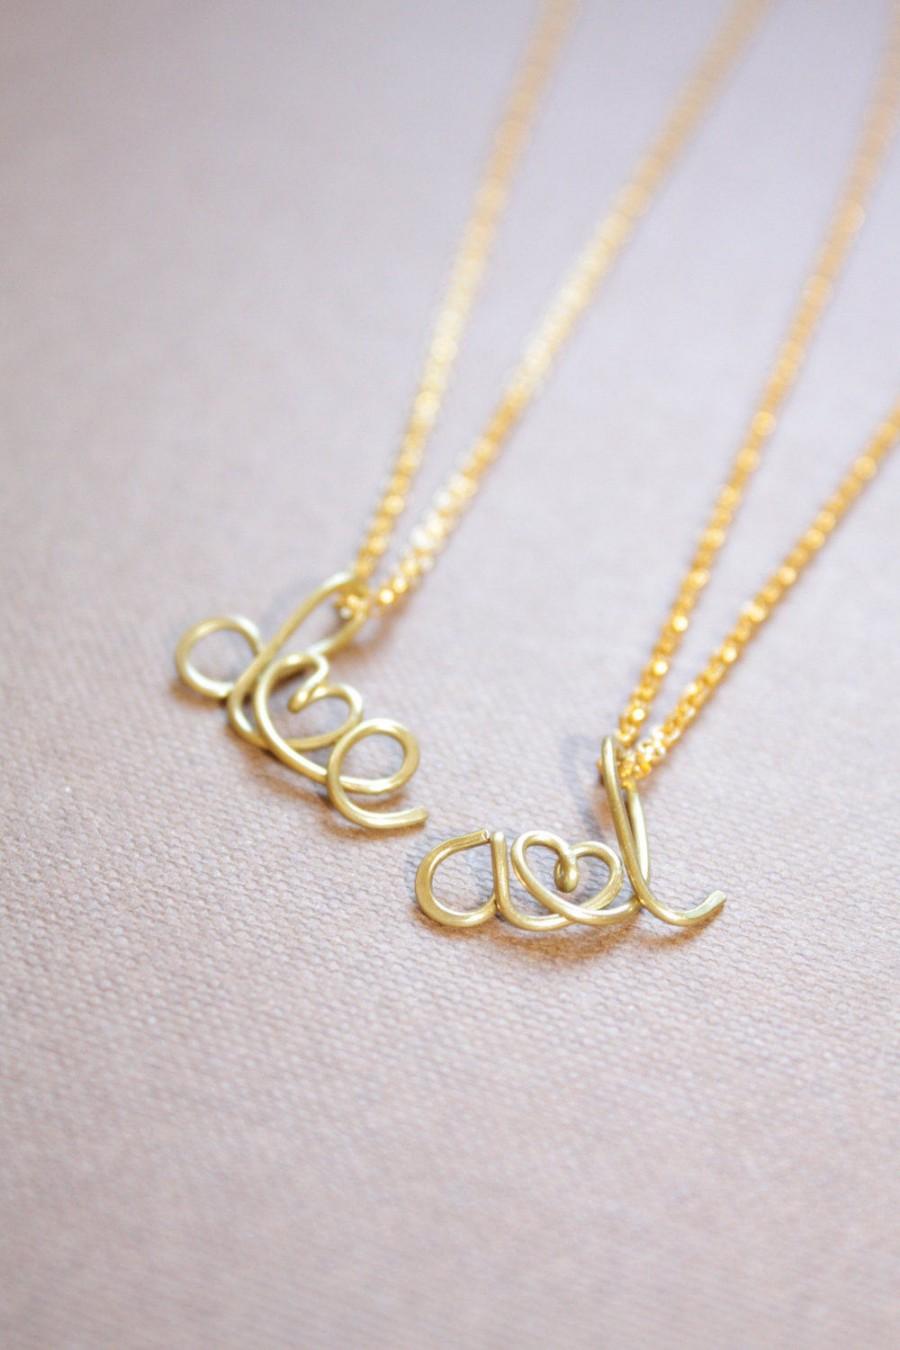 Wedding - Two Lovers Necklace Personalized Engagement Wedding Bridal Shower Anniversary Gift Couples Necklace Two Initials With Heart Letter Necklace